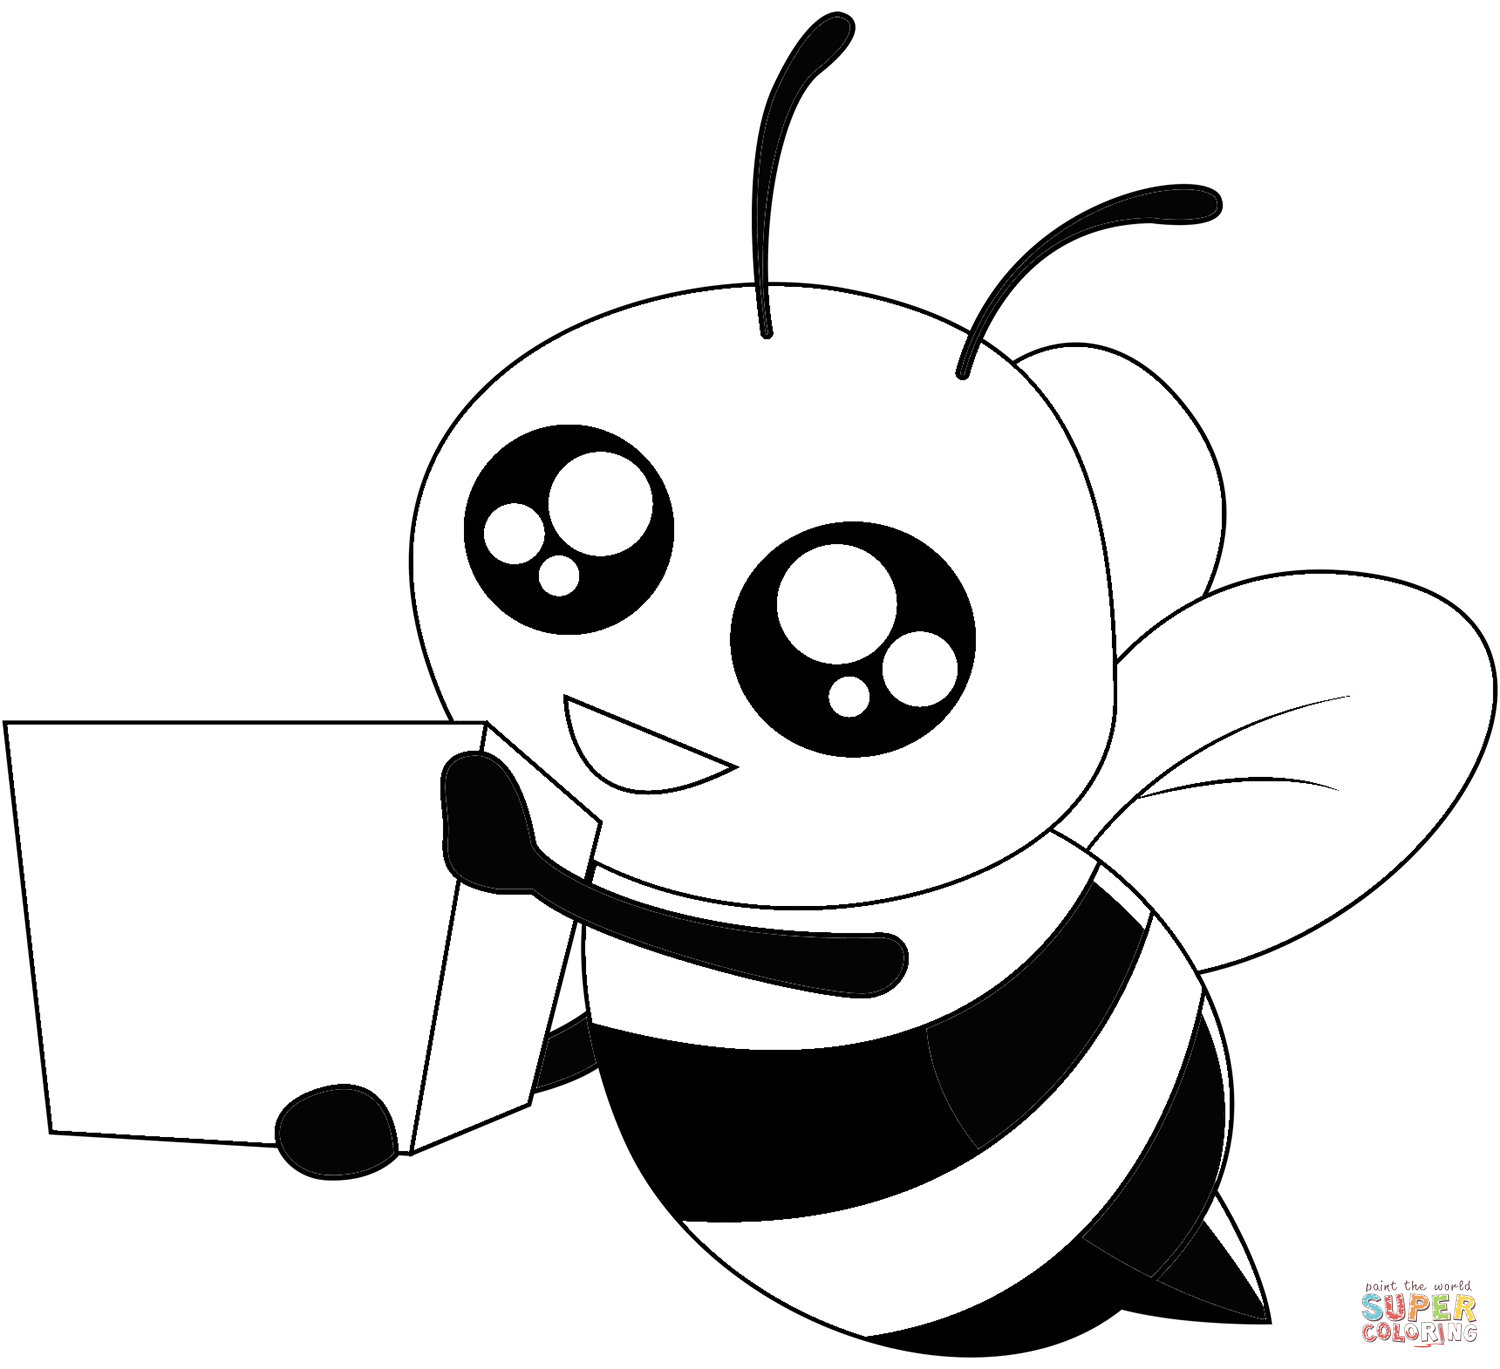 Bee with Heart coloring page  Free Printable Coloring Pages